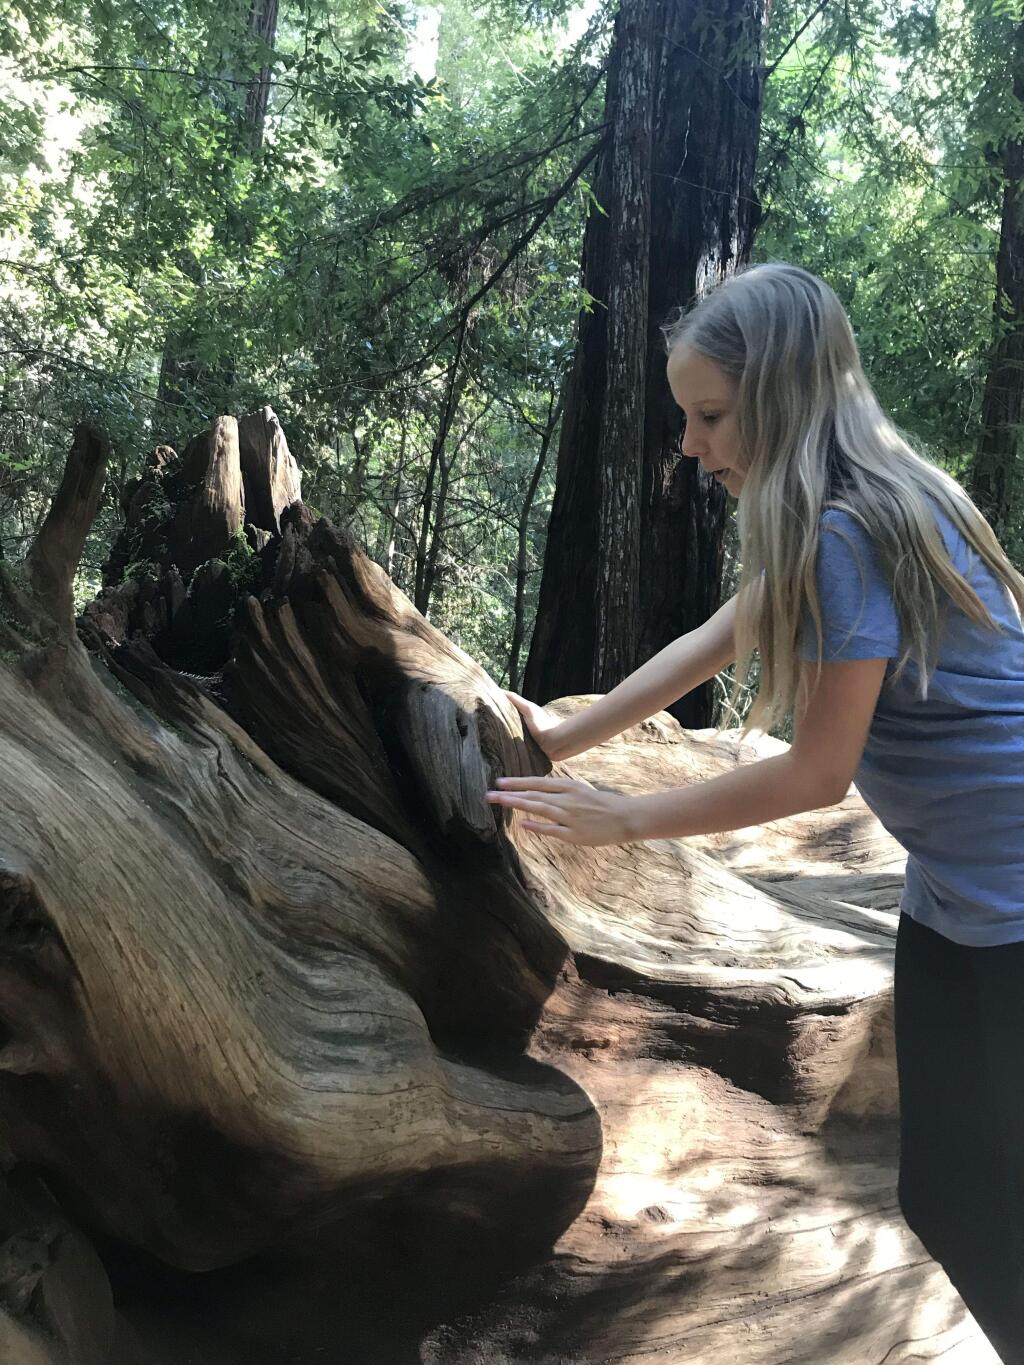 Ramona Hymn's homeschooling includes volunteering with Stewards of the Coast and Redwoods where she's studied redwood ecology, tide pool docent training and helped run the mobile education and visitor centers. Soneile Hymn